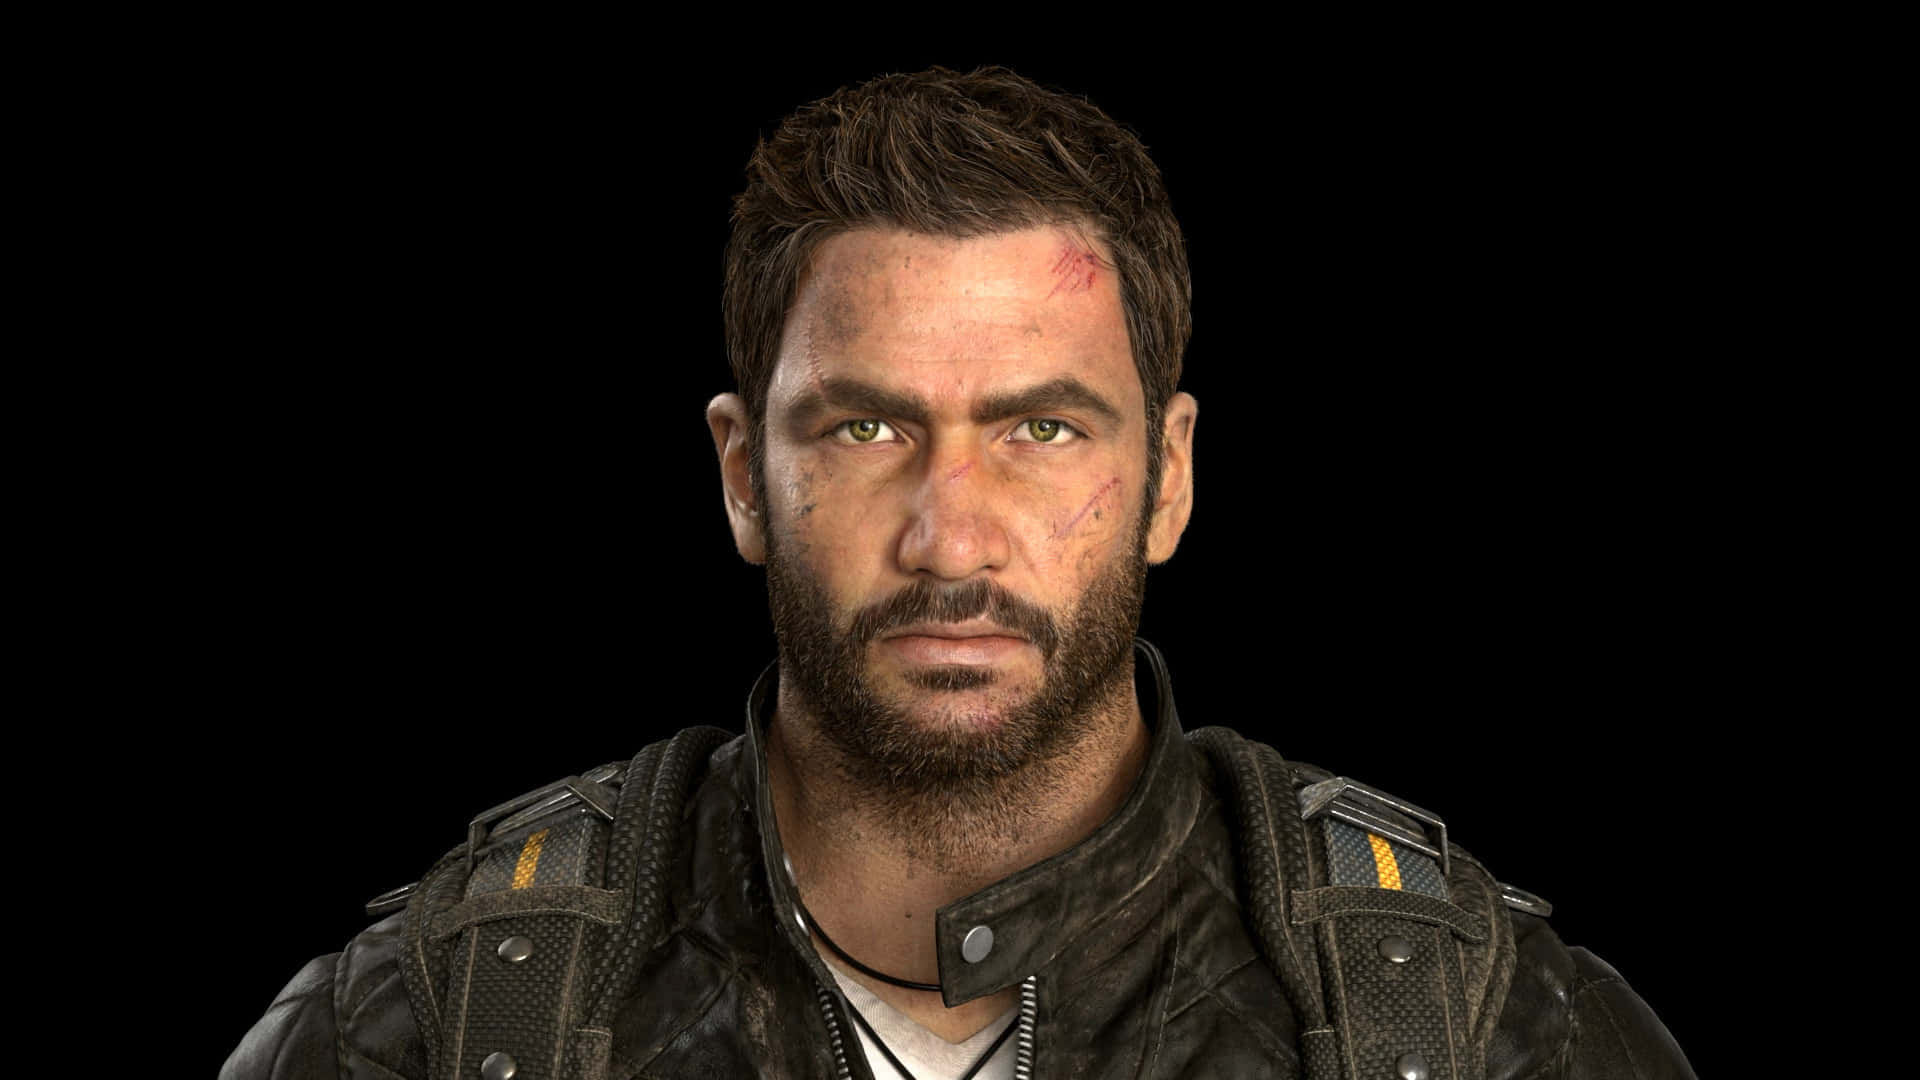 Engaging 1920x1080 Just Cause 4 Game Scene Background